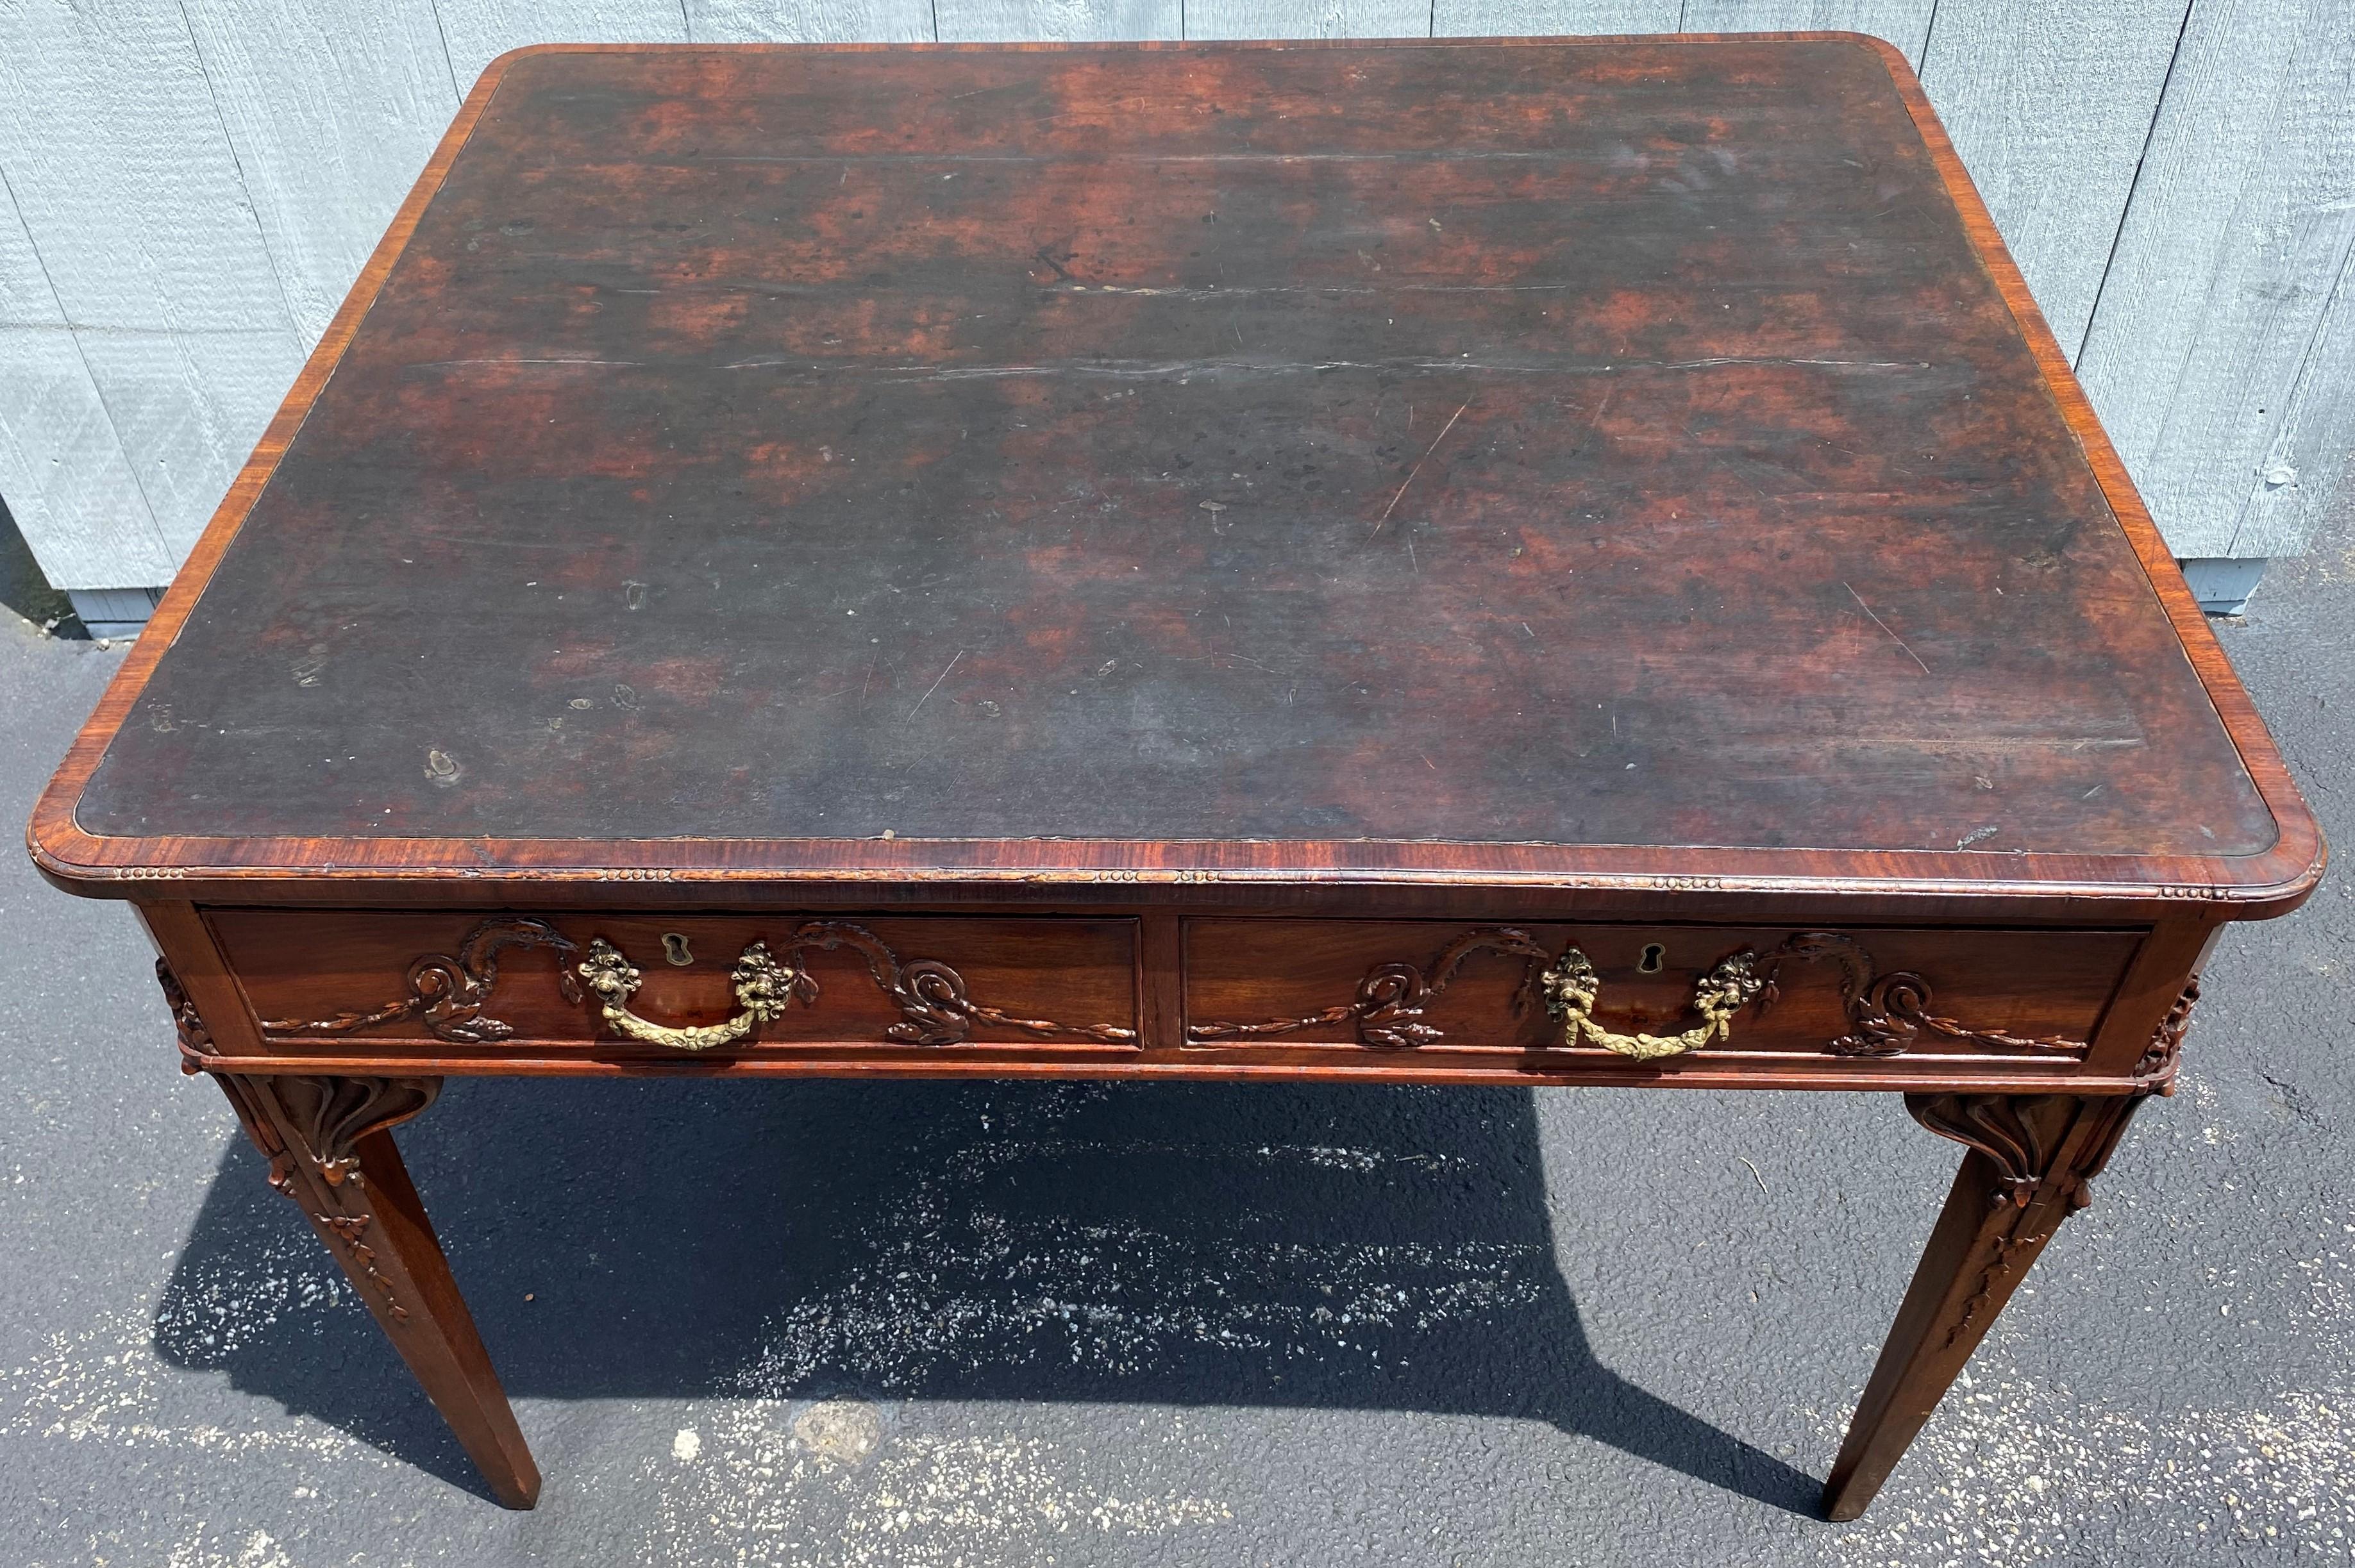 A fine proportion mahogany rectangular partners desk with brown leather top with a crossbanded border with delicate carving, surmounting a frieze with two fitted and cockbeaded document drawers on the front and back, each decorated with brass